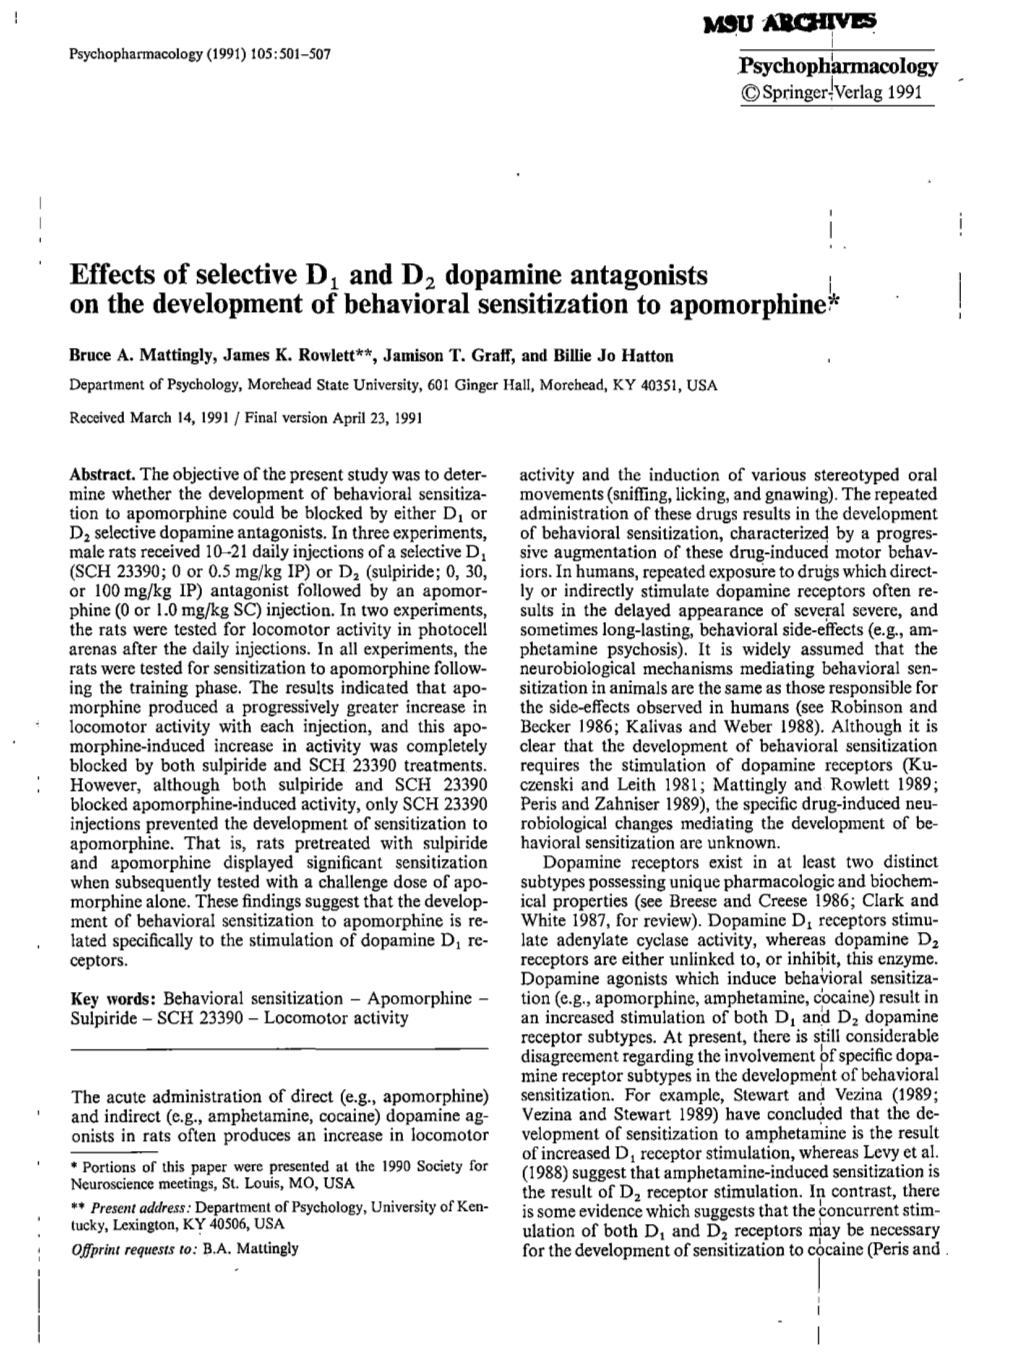 Effects of Selective D1 and D2 Dopamine Antagonists on The